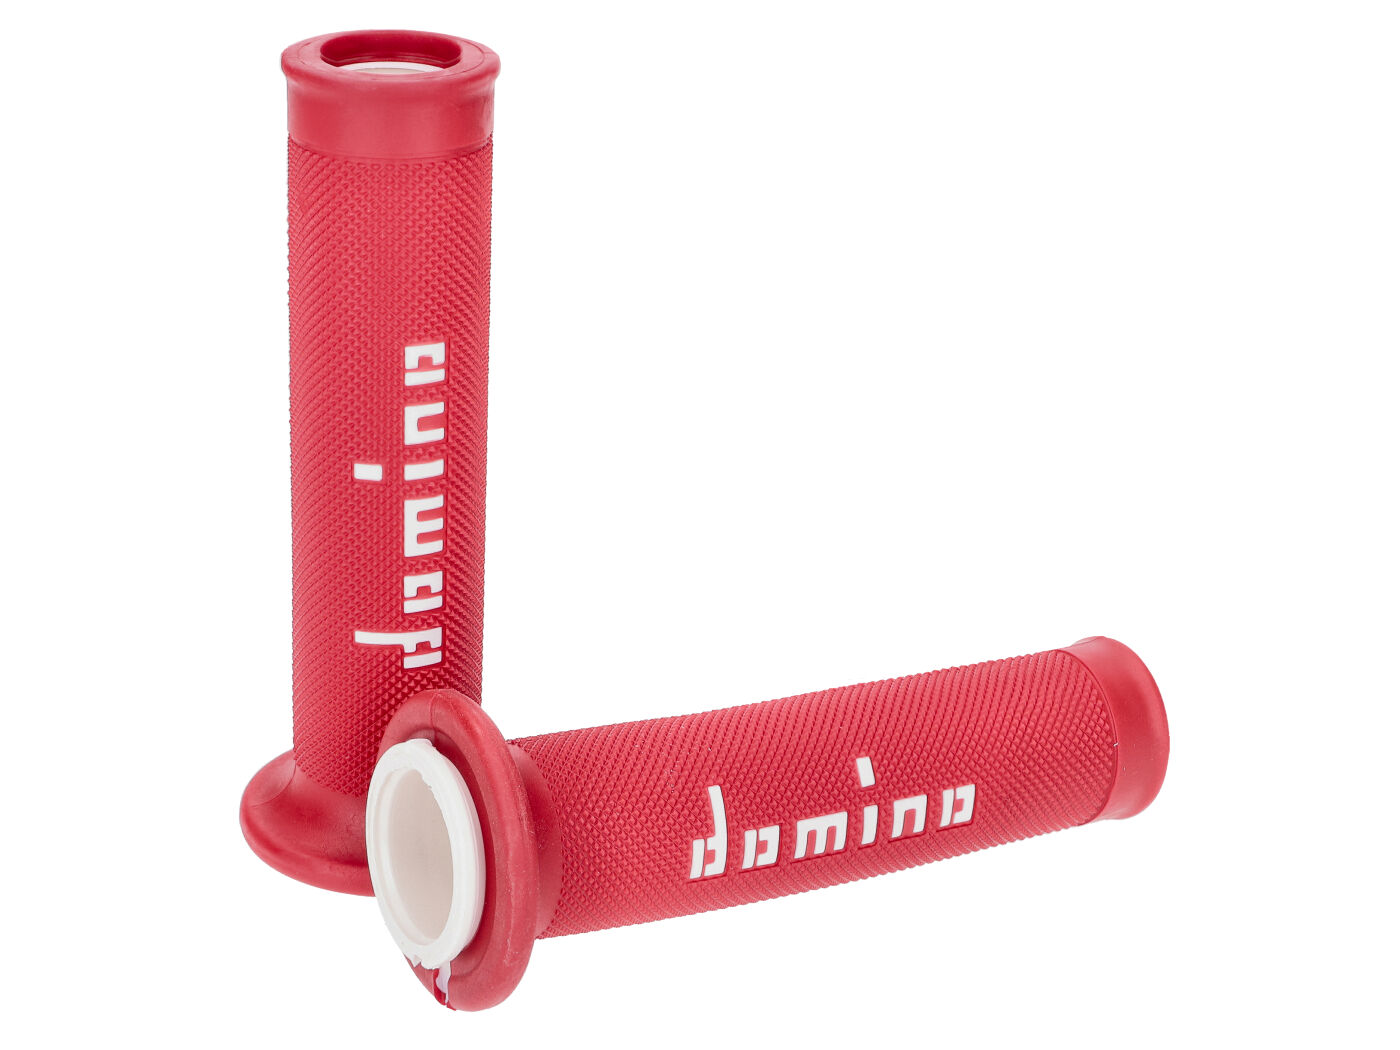 Domino Griffe A010 rot/weiß